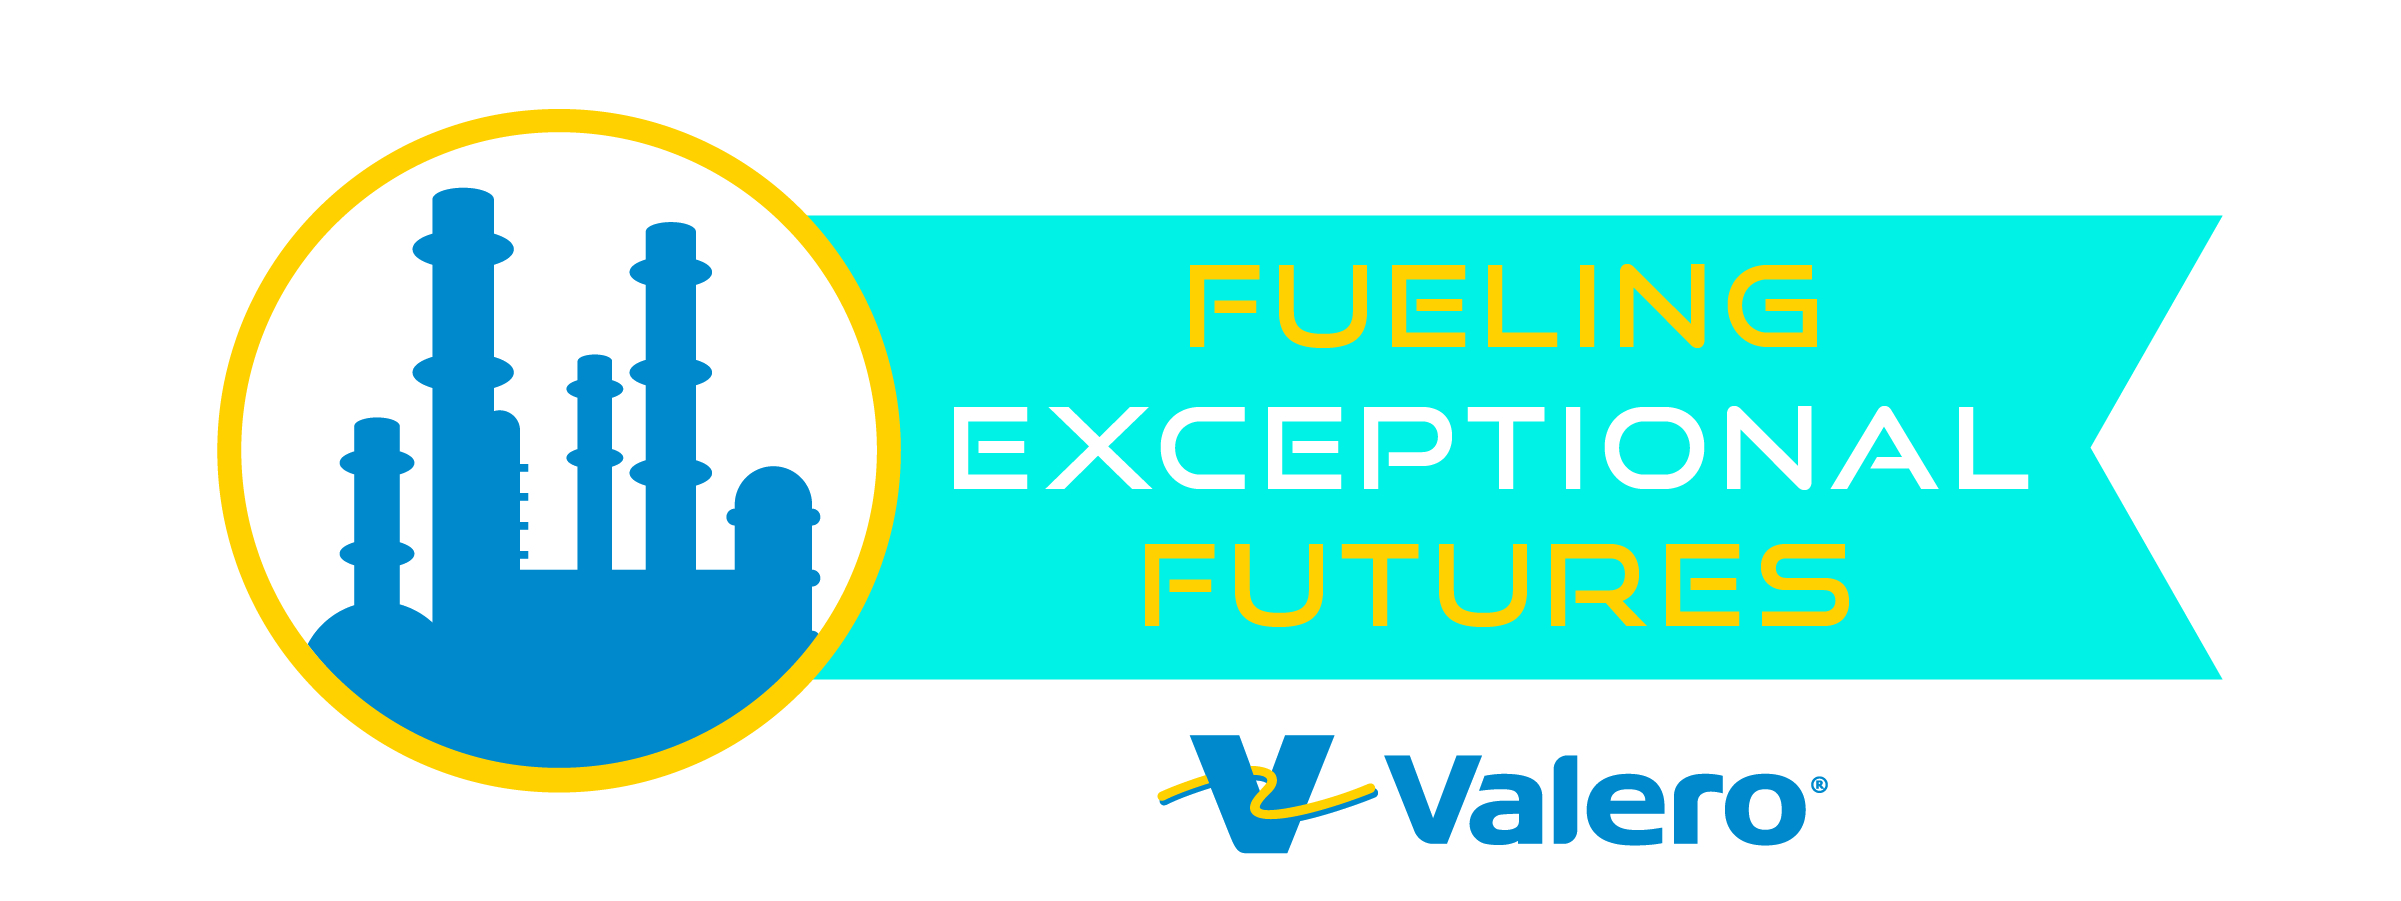 A graphic with Valero's logo that says "Fueling Exceptional Futures"